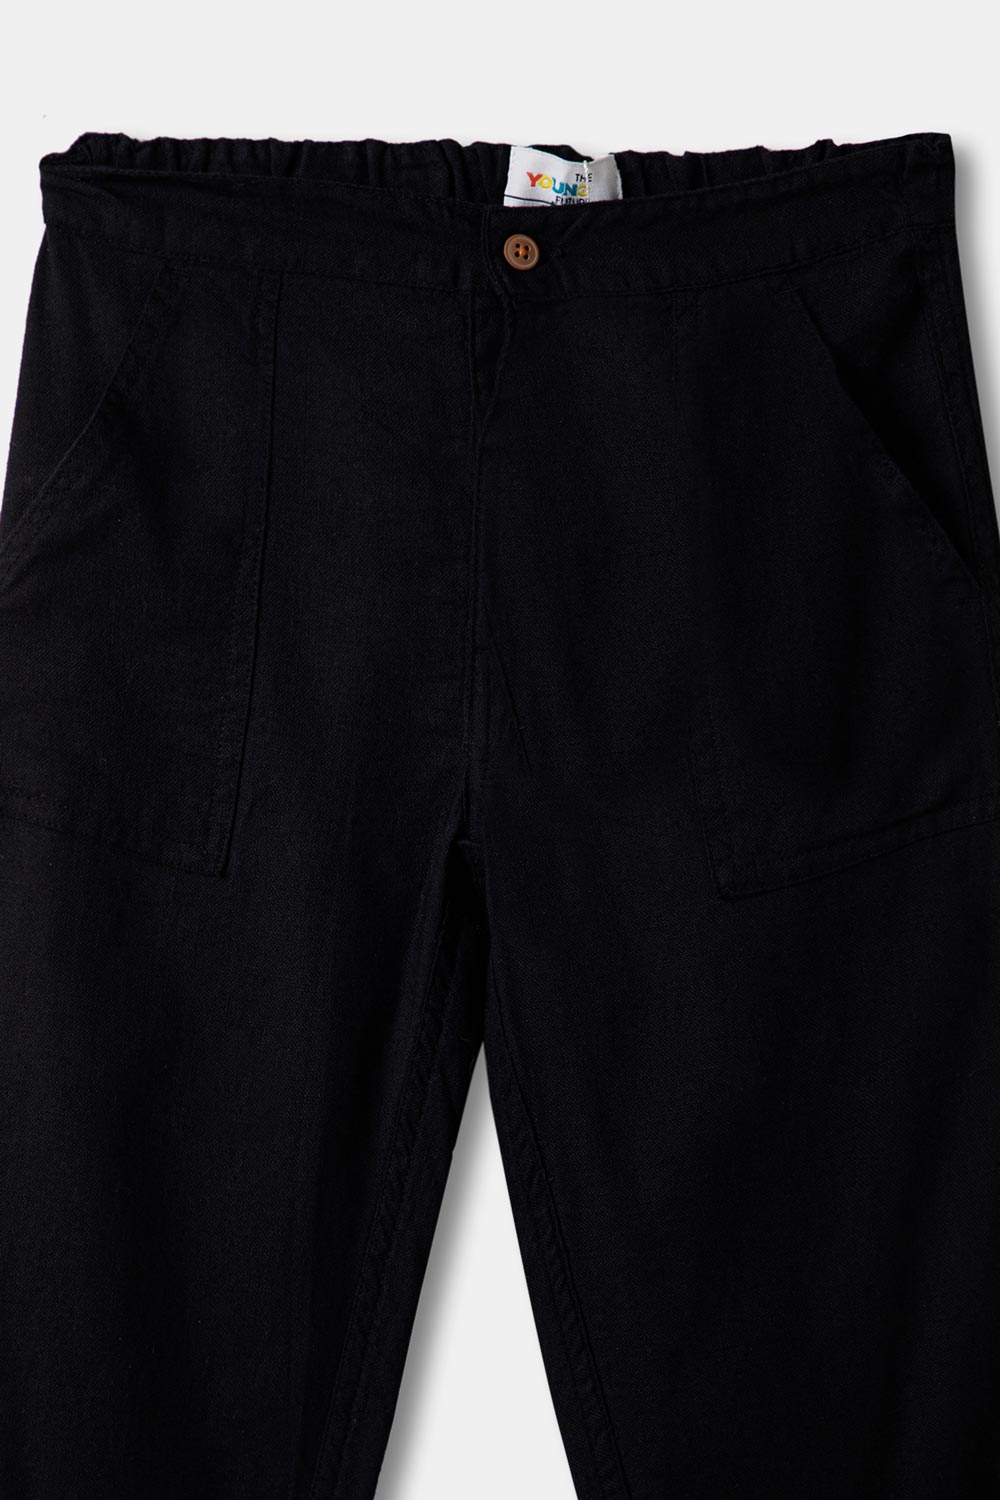 The Young Future  Pants for Boys  - Black  - BT01